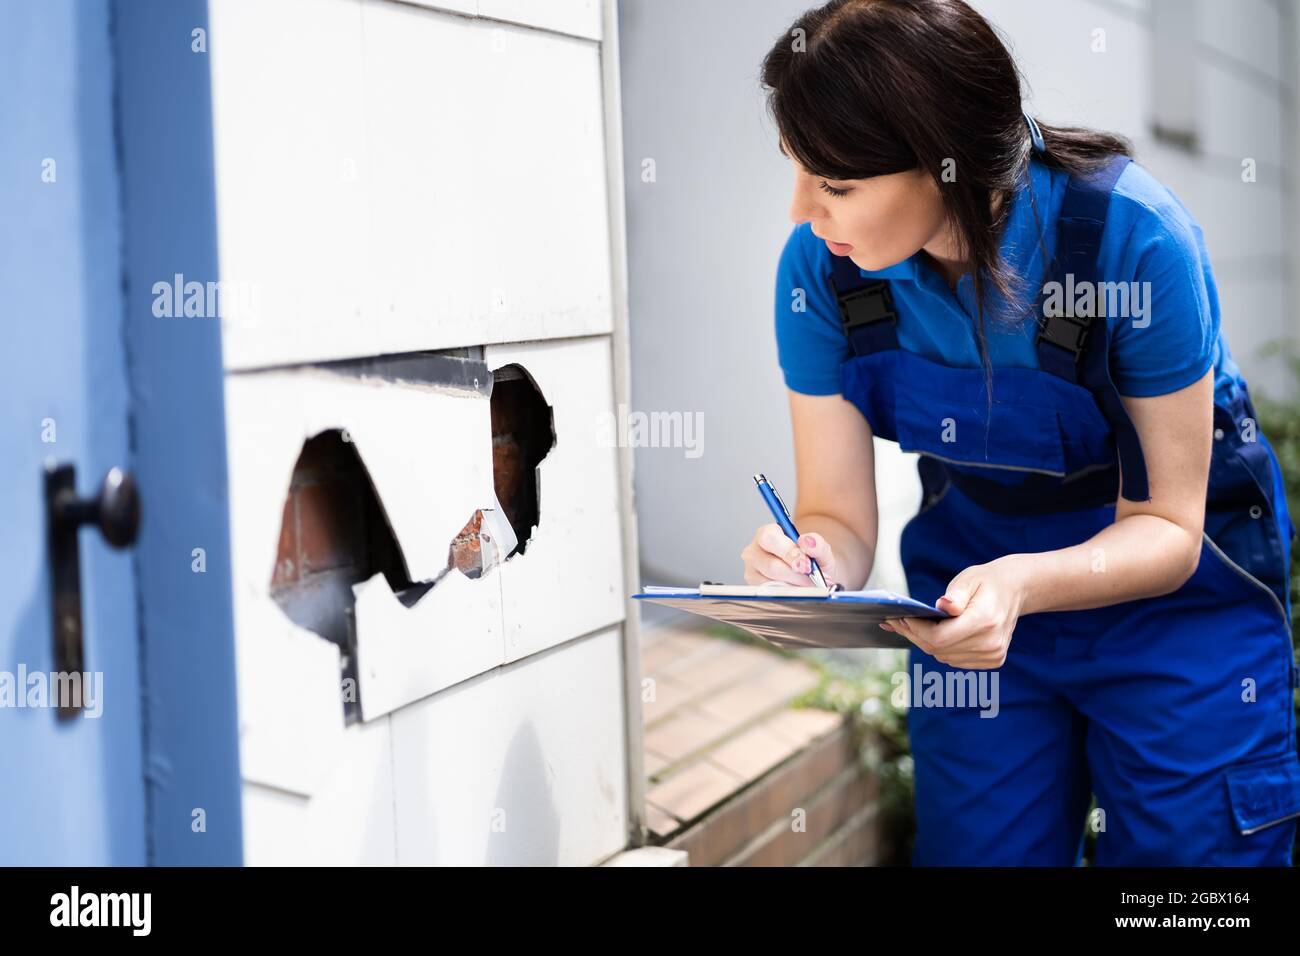 Real Estate Property Appraisal. Woman Inspecting House Stock Photo